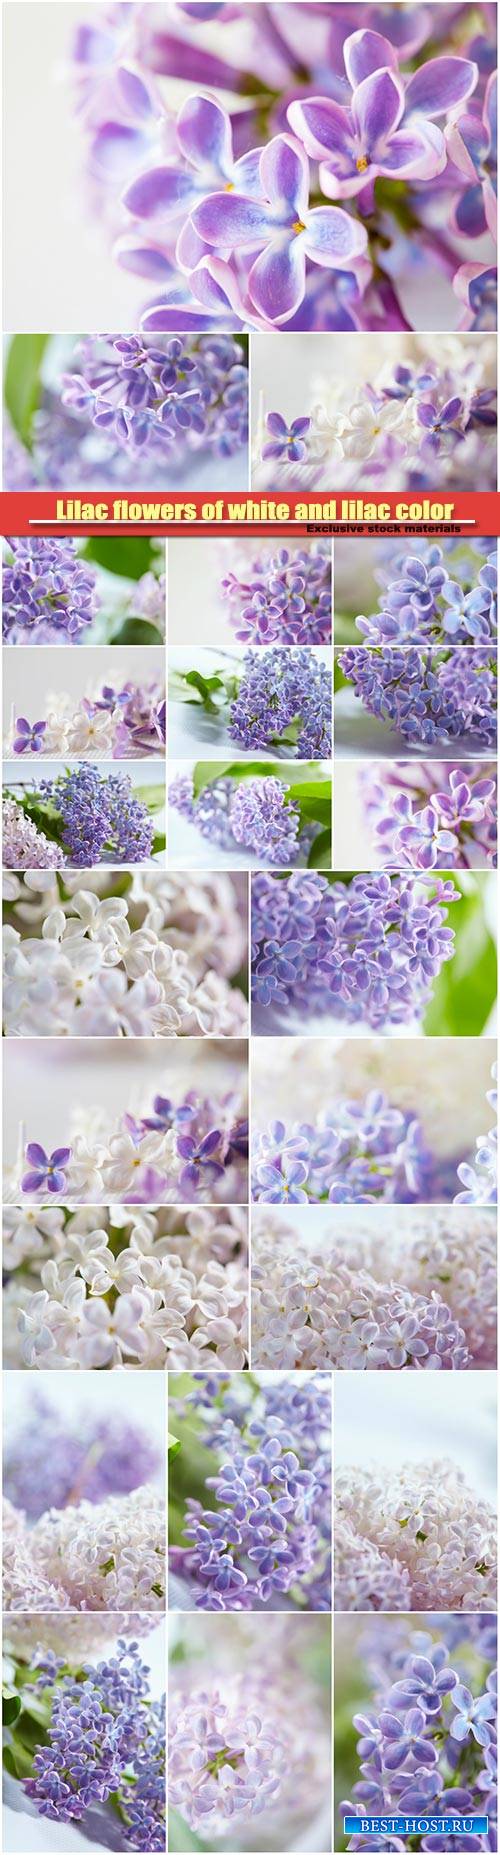 Lilac flowers of white and lilac color